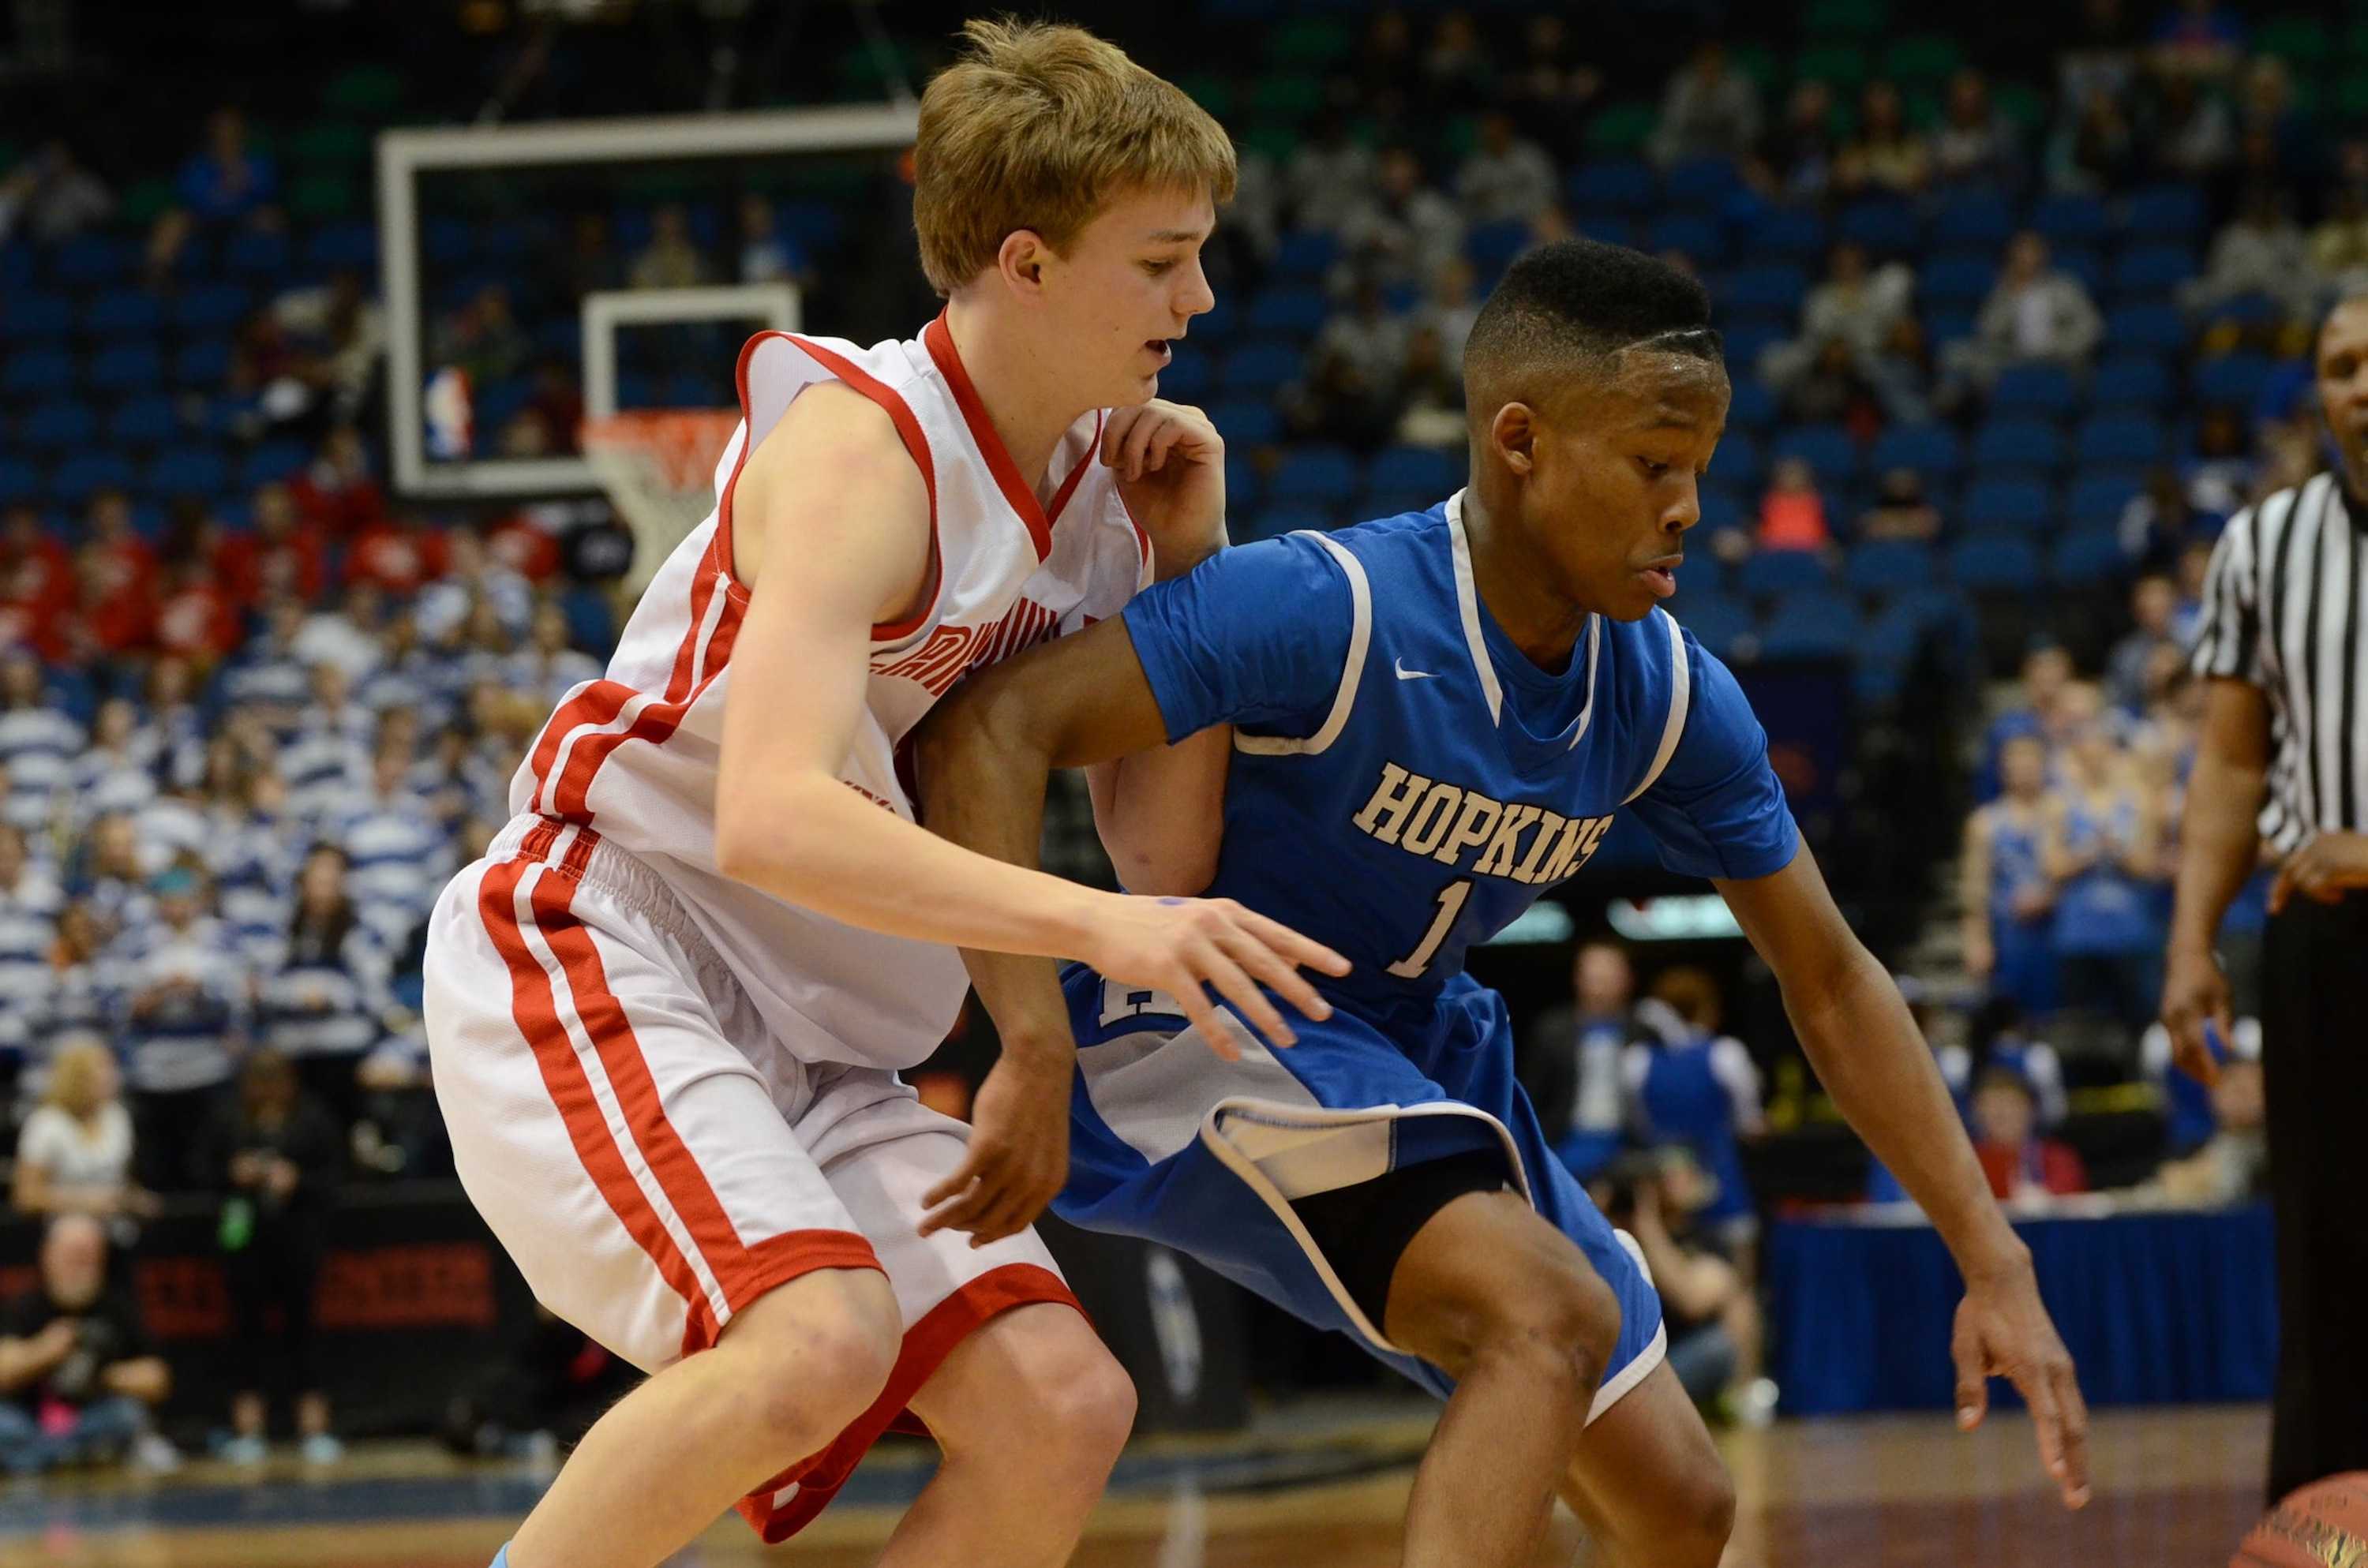 Boys+basketball+upset+by+Lakeville+North+in+state+quarterfinal